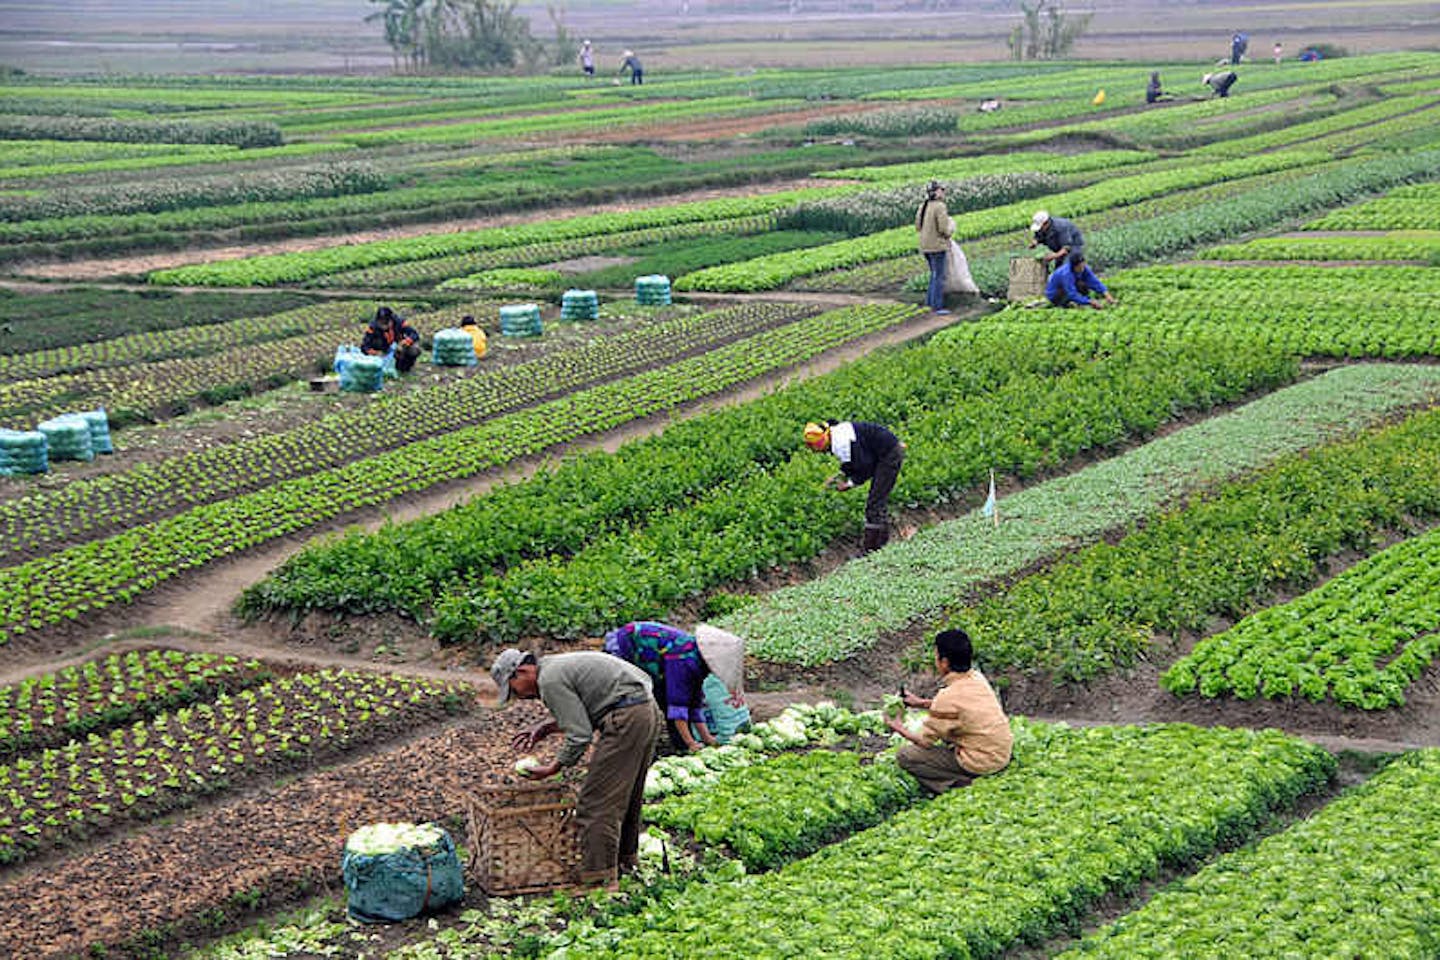 When agricultural workers go hungry | Opinion | Eco-Business | Asia Pacific